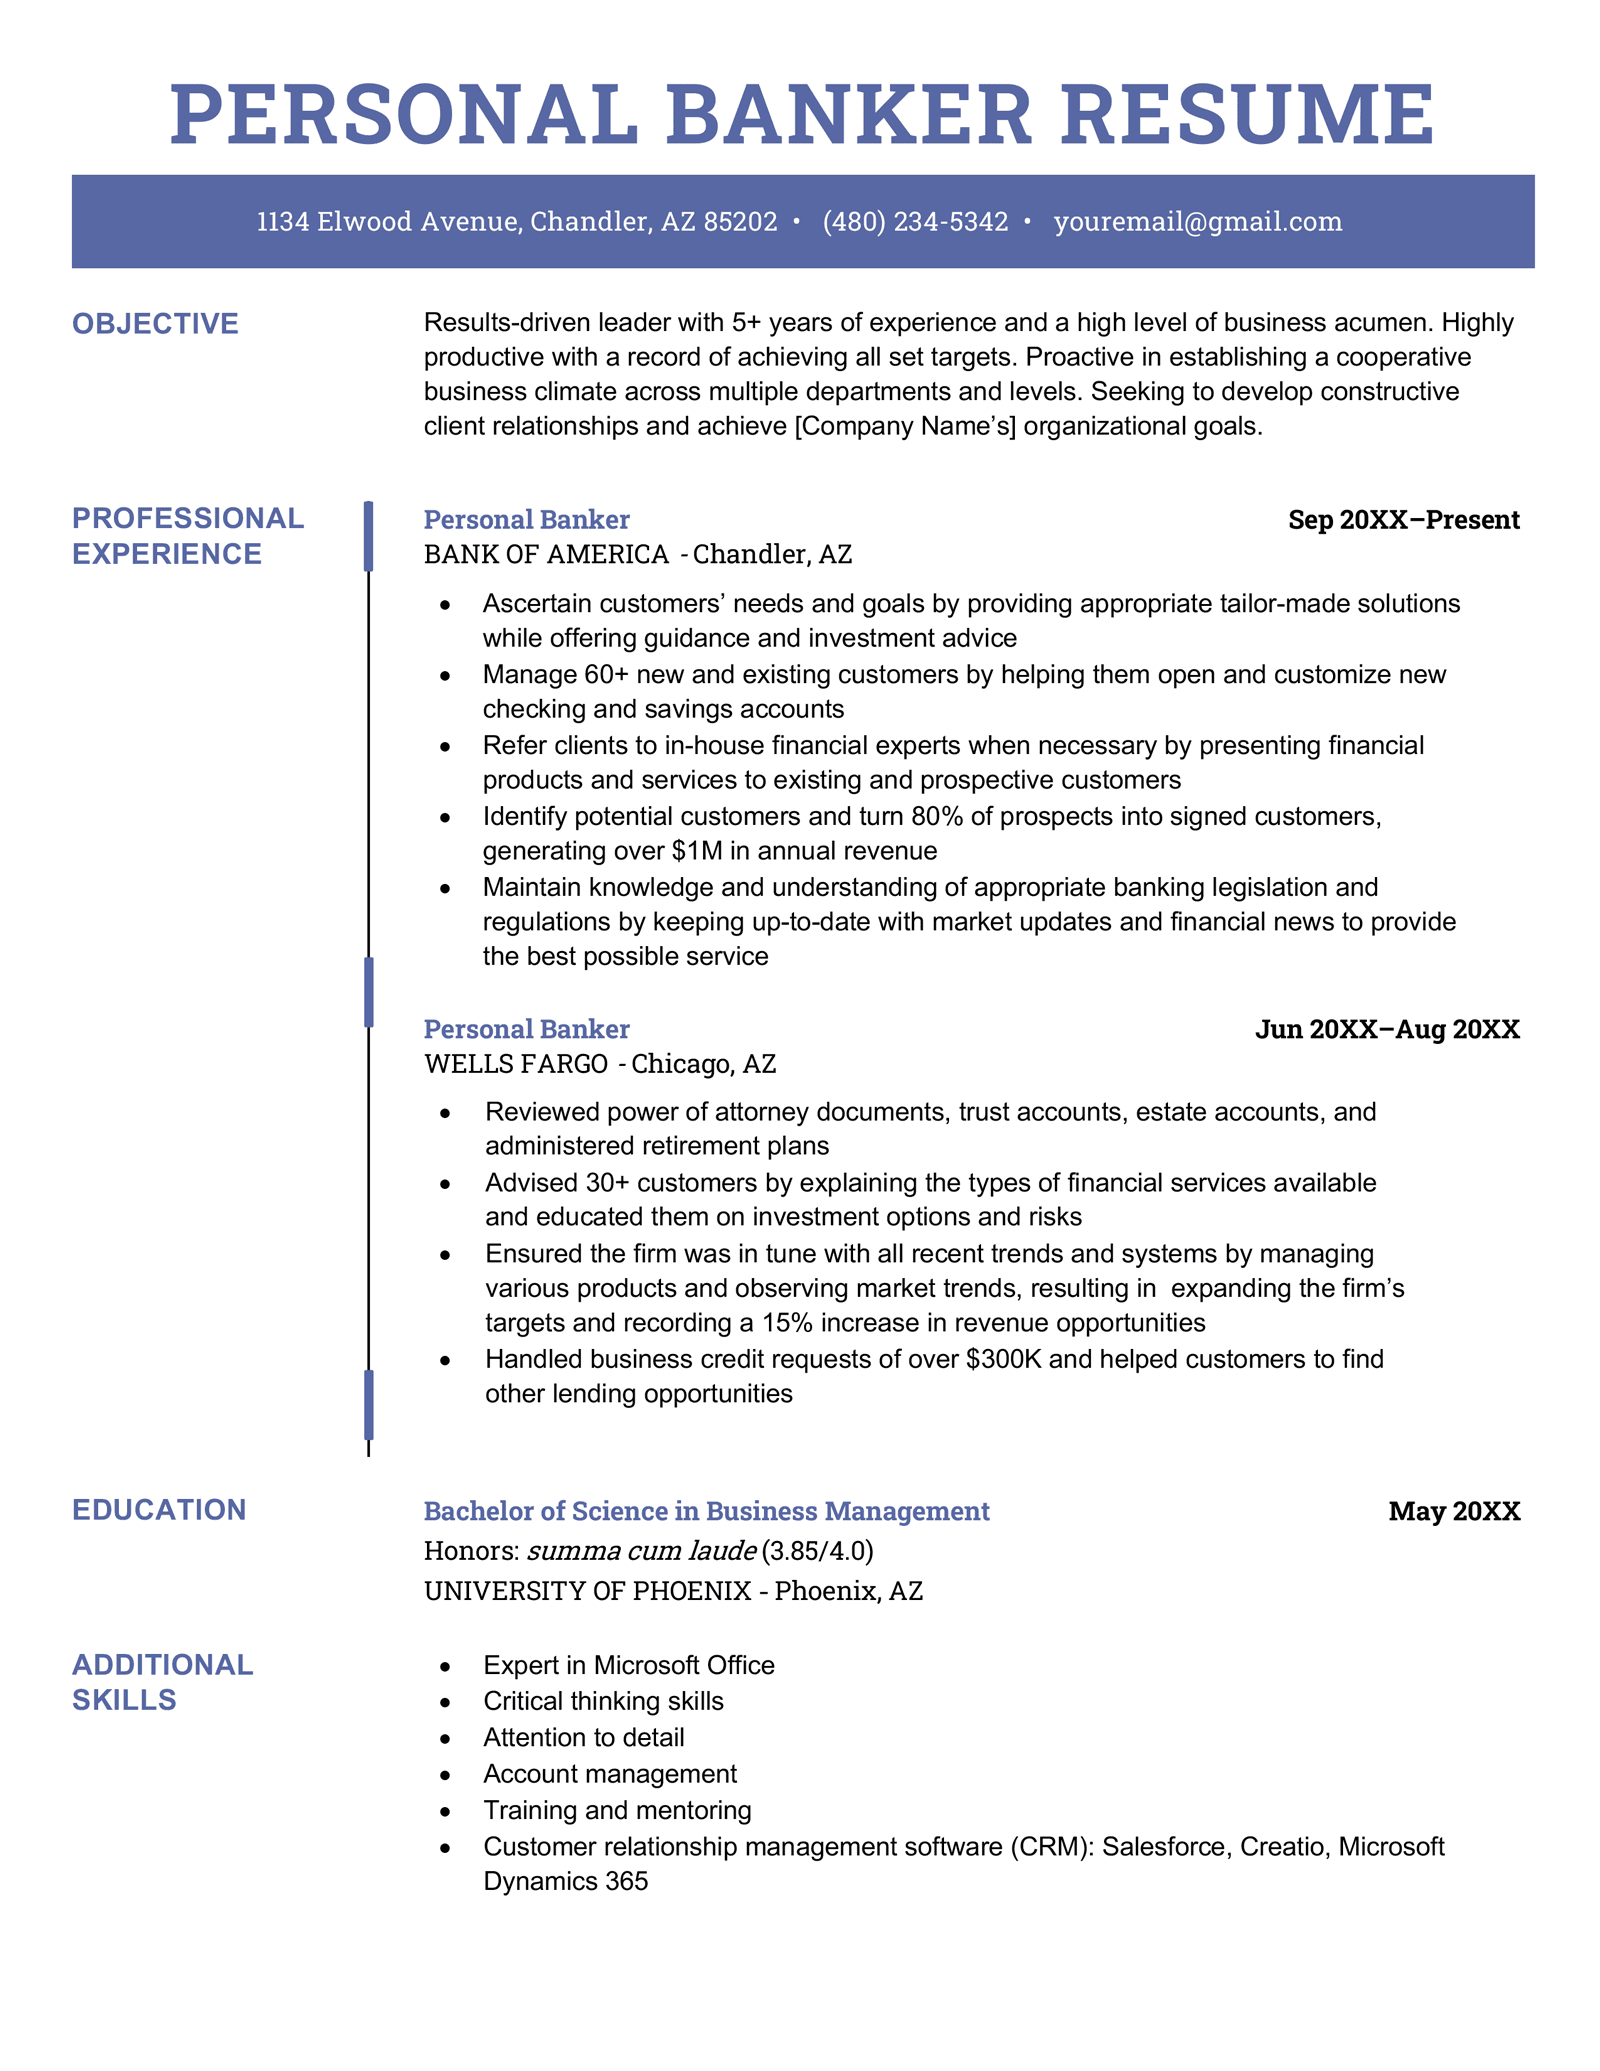 An example of a personal banker resume on a template with a blue contact header and a resume objective at the top of the resume, followed by professional experience, education, and an additional skills section